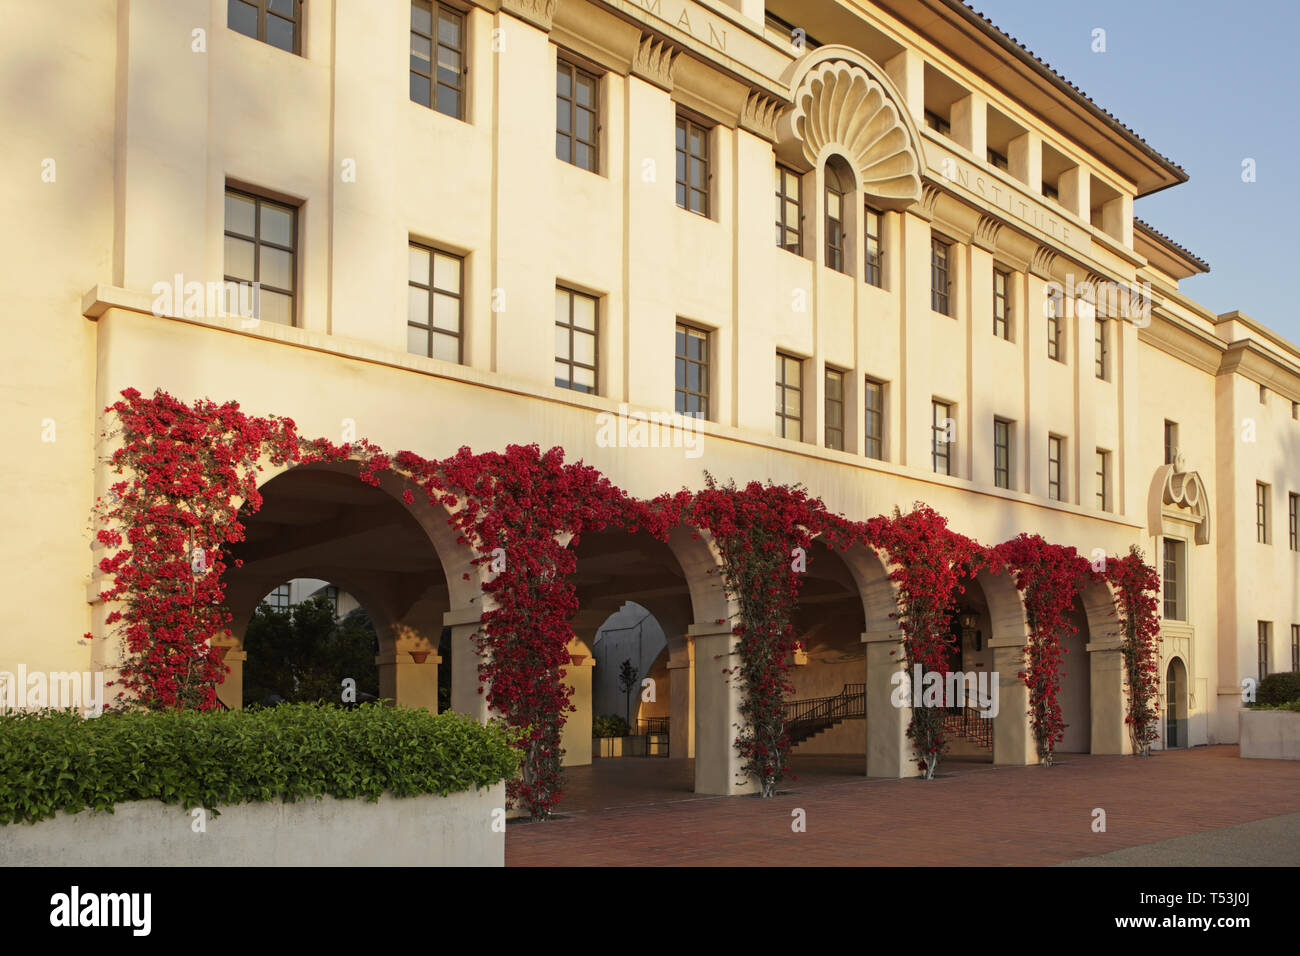 Caltech campus series, Beckman Institute and red flowering vine on the arches Stock Photo